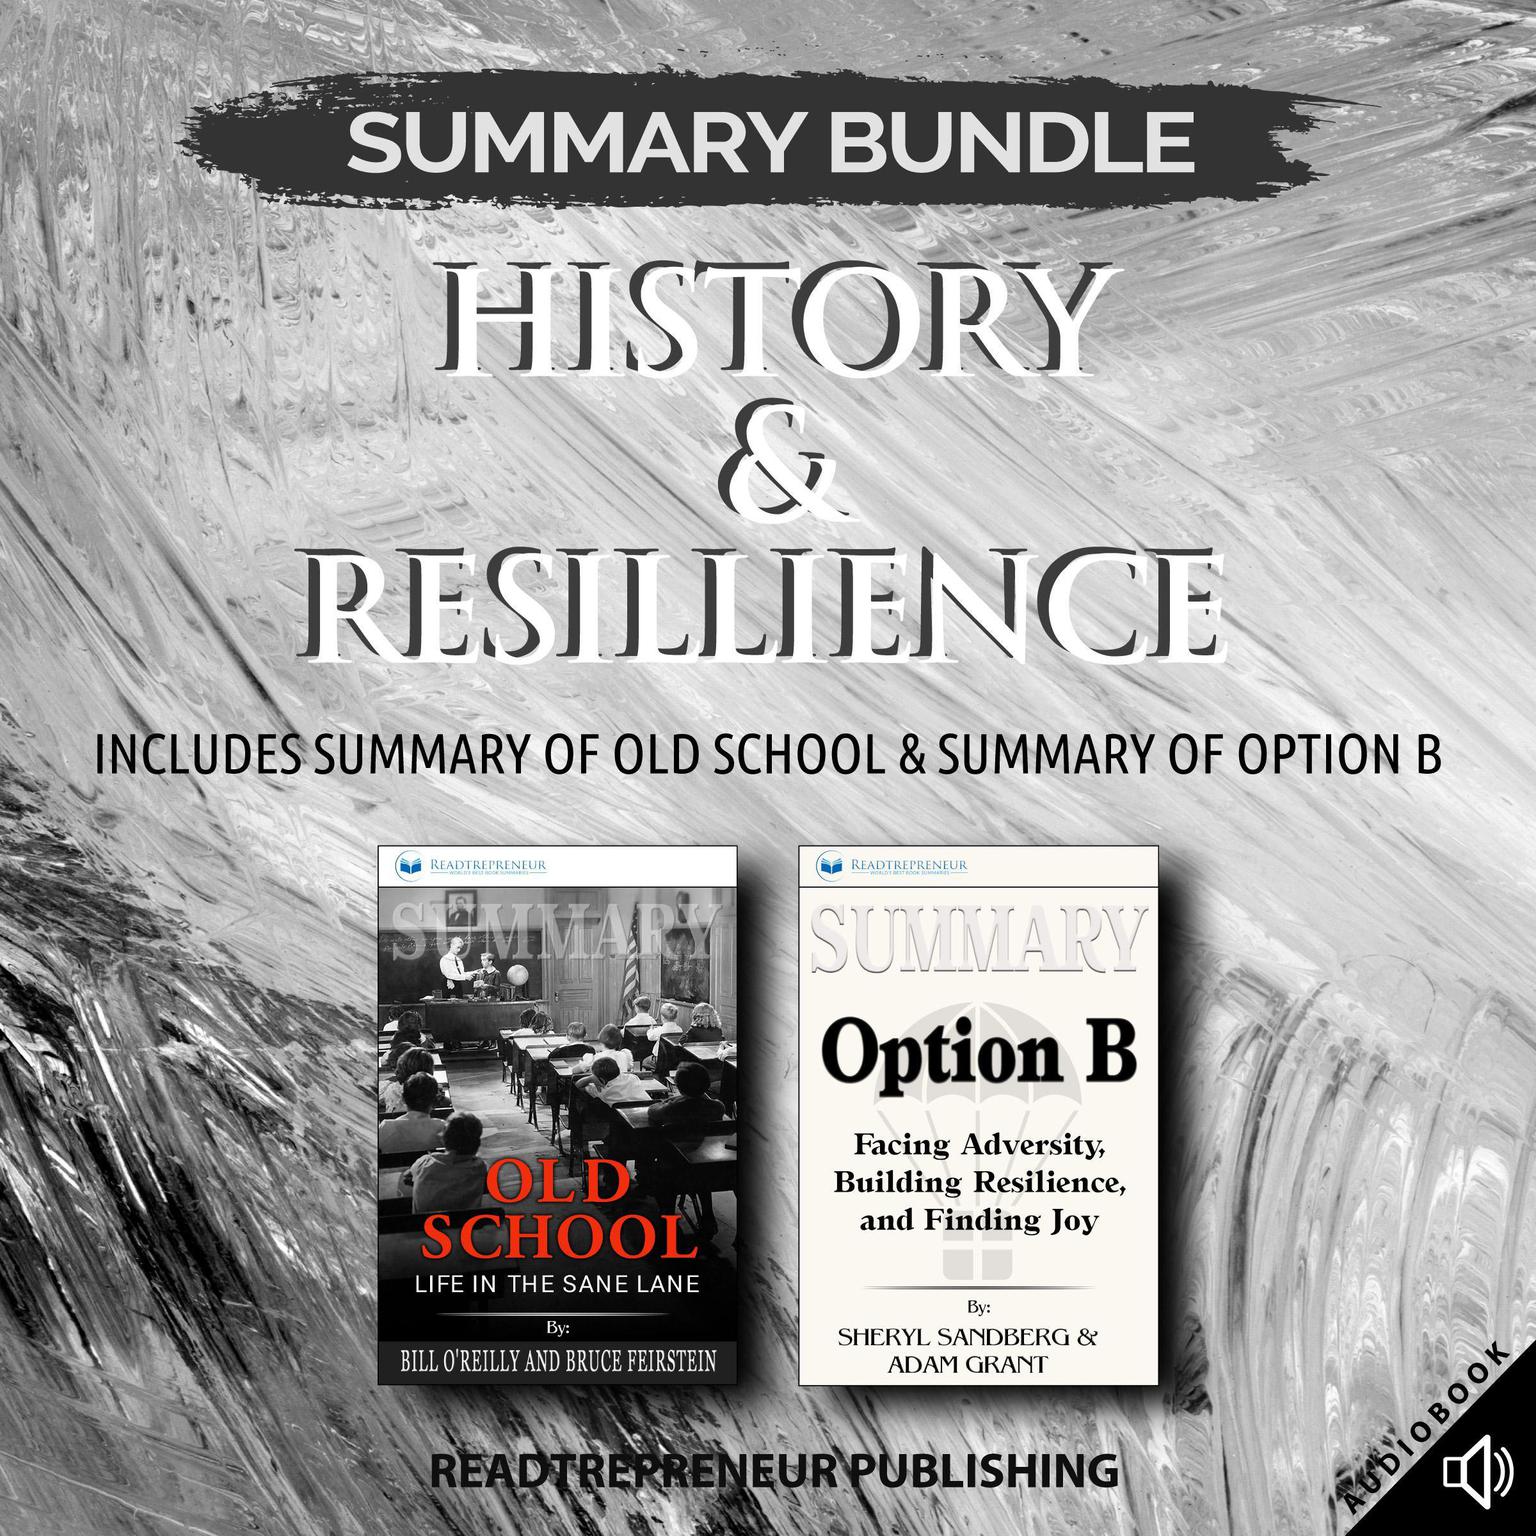 Summary Bundle: History & Resillience | Readtrepreneur Publishing: Includes Summary of Old School & Summary of Option B: Includes Summary of Old School & Summary of Option B Audiobook, by Readtrepreneur Publishing